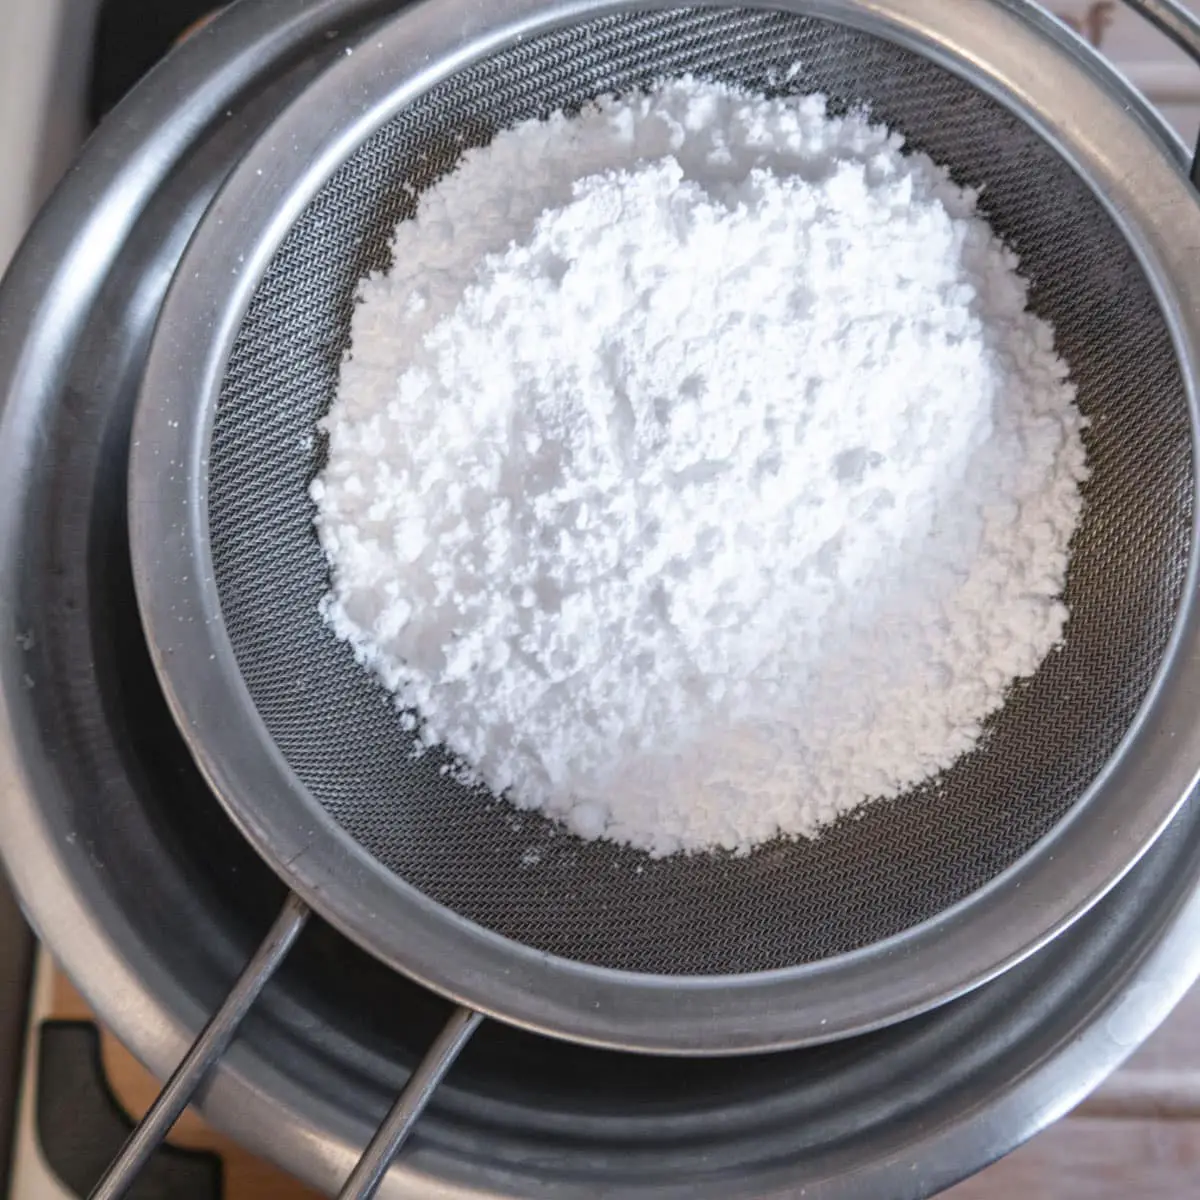 powderes sugar in a sieve on top of a bowl